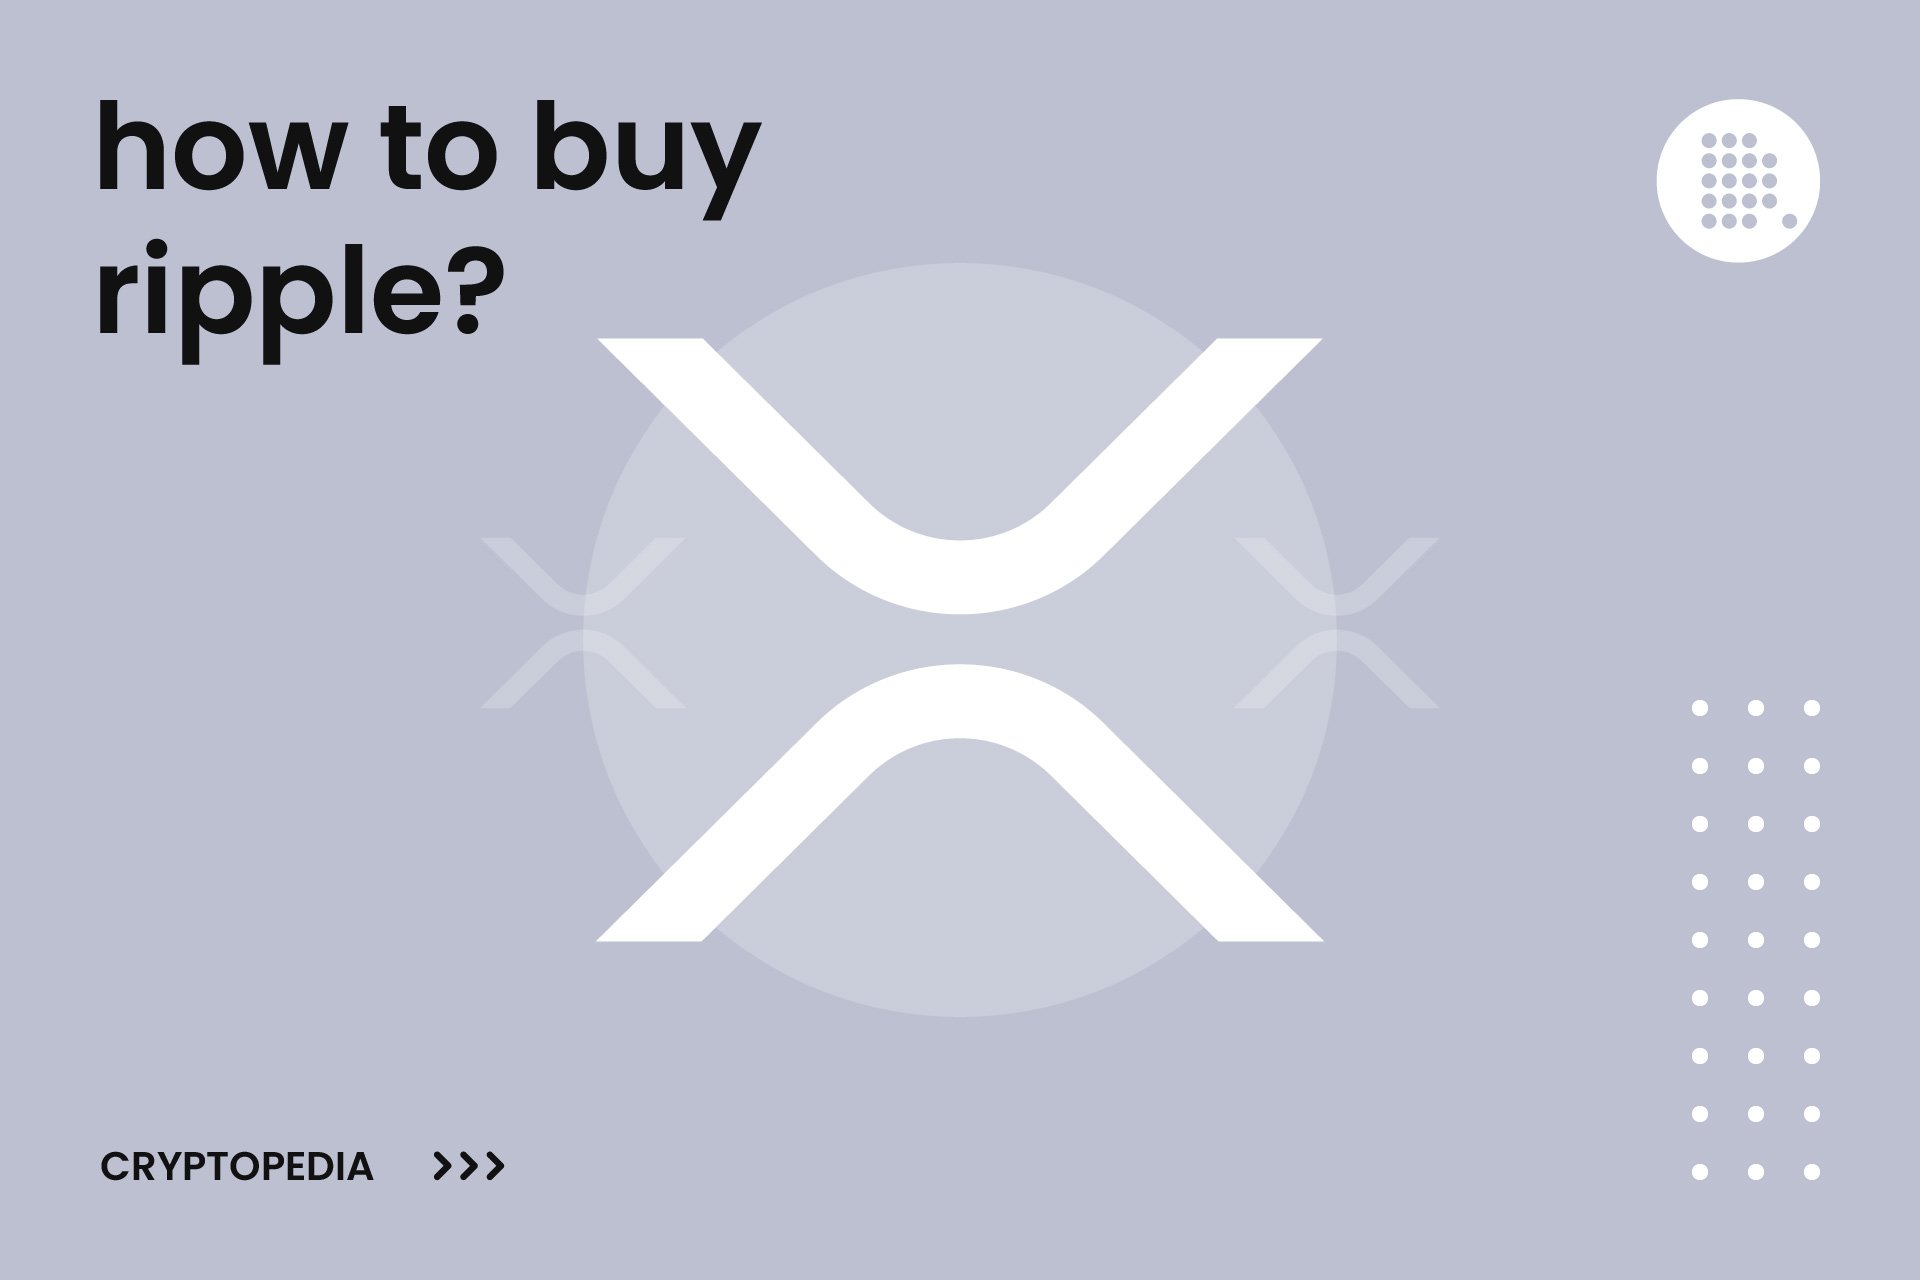 How to buy ripple?